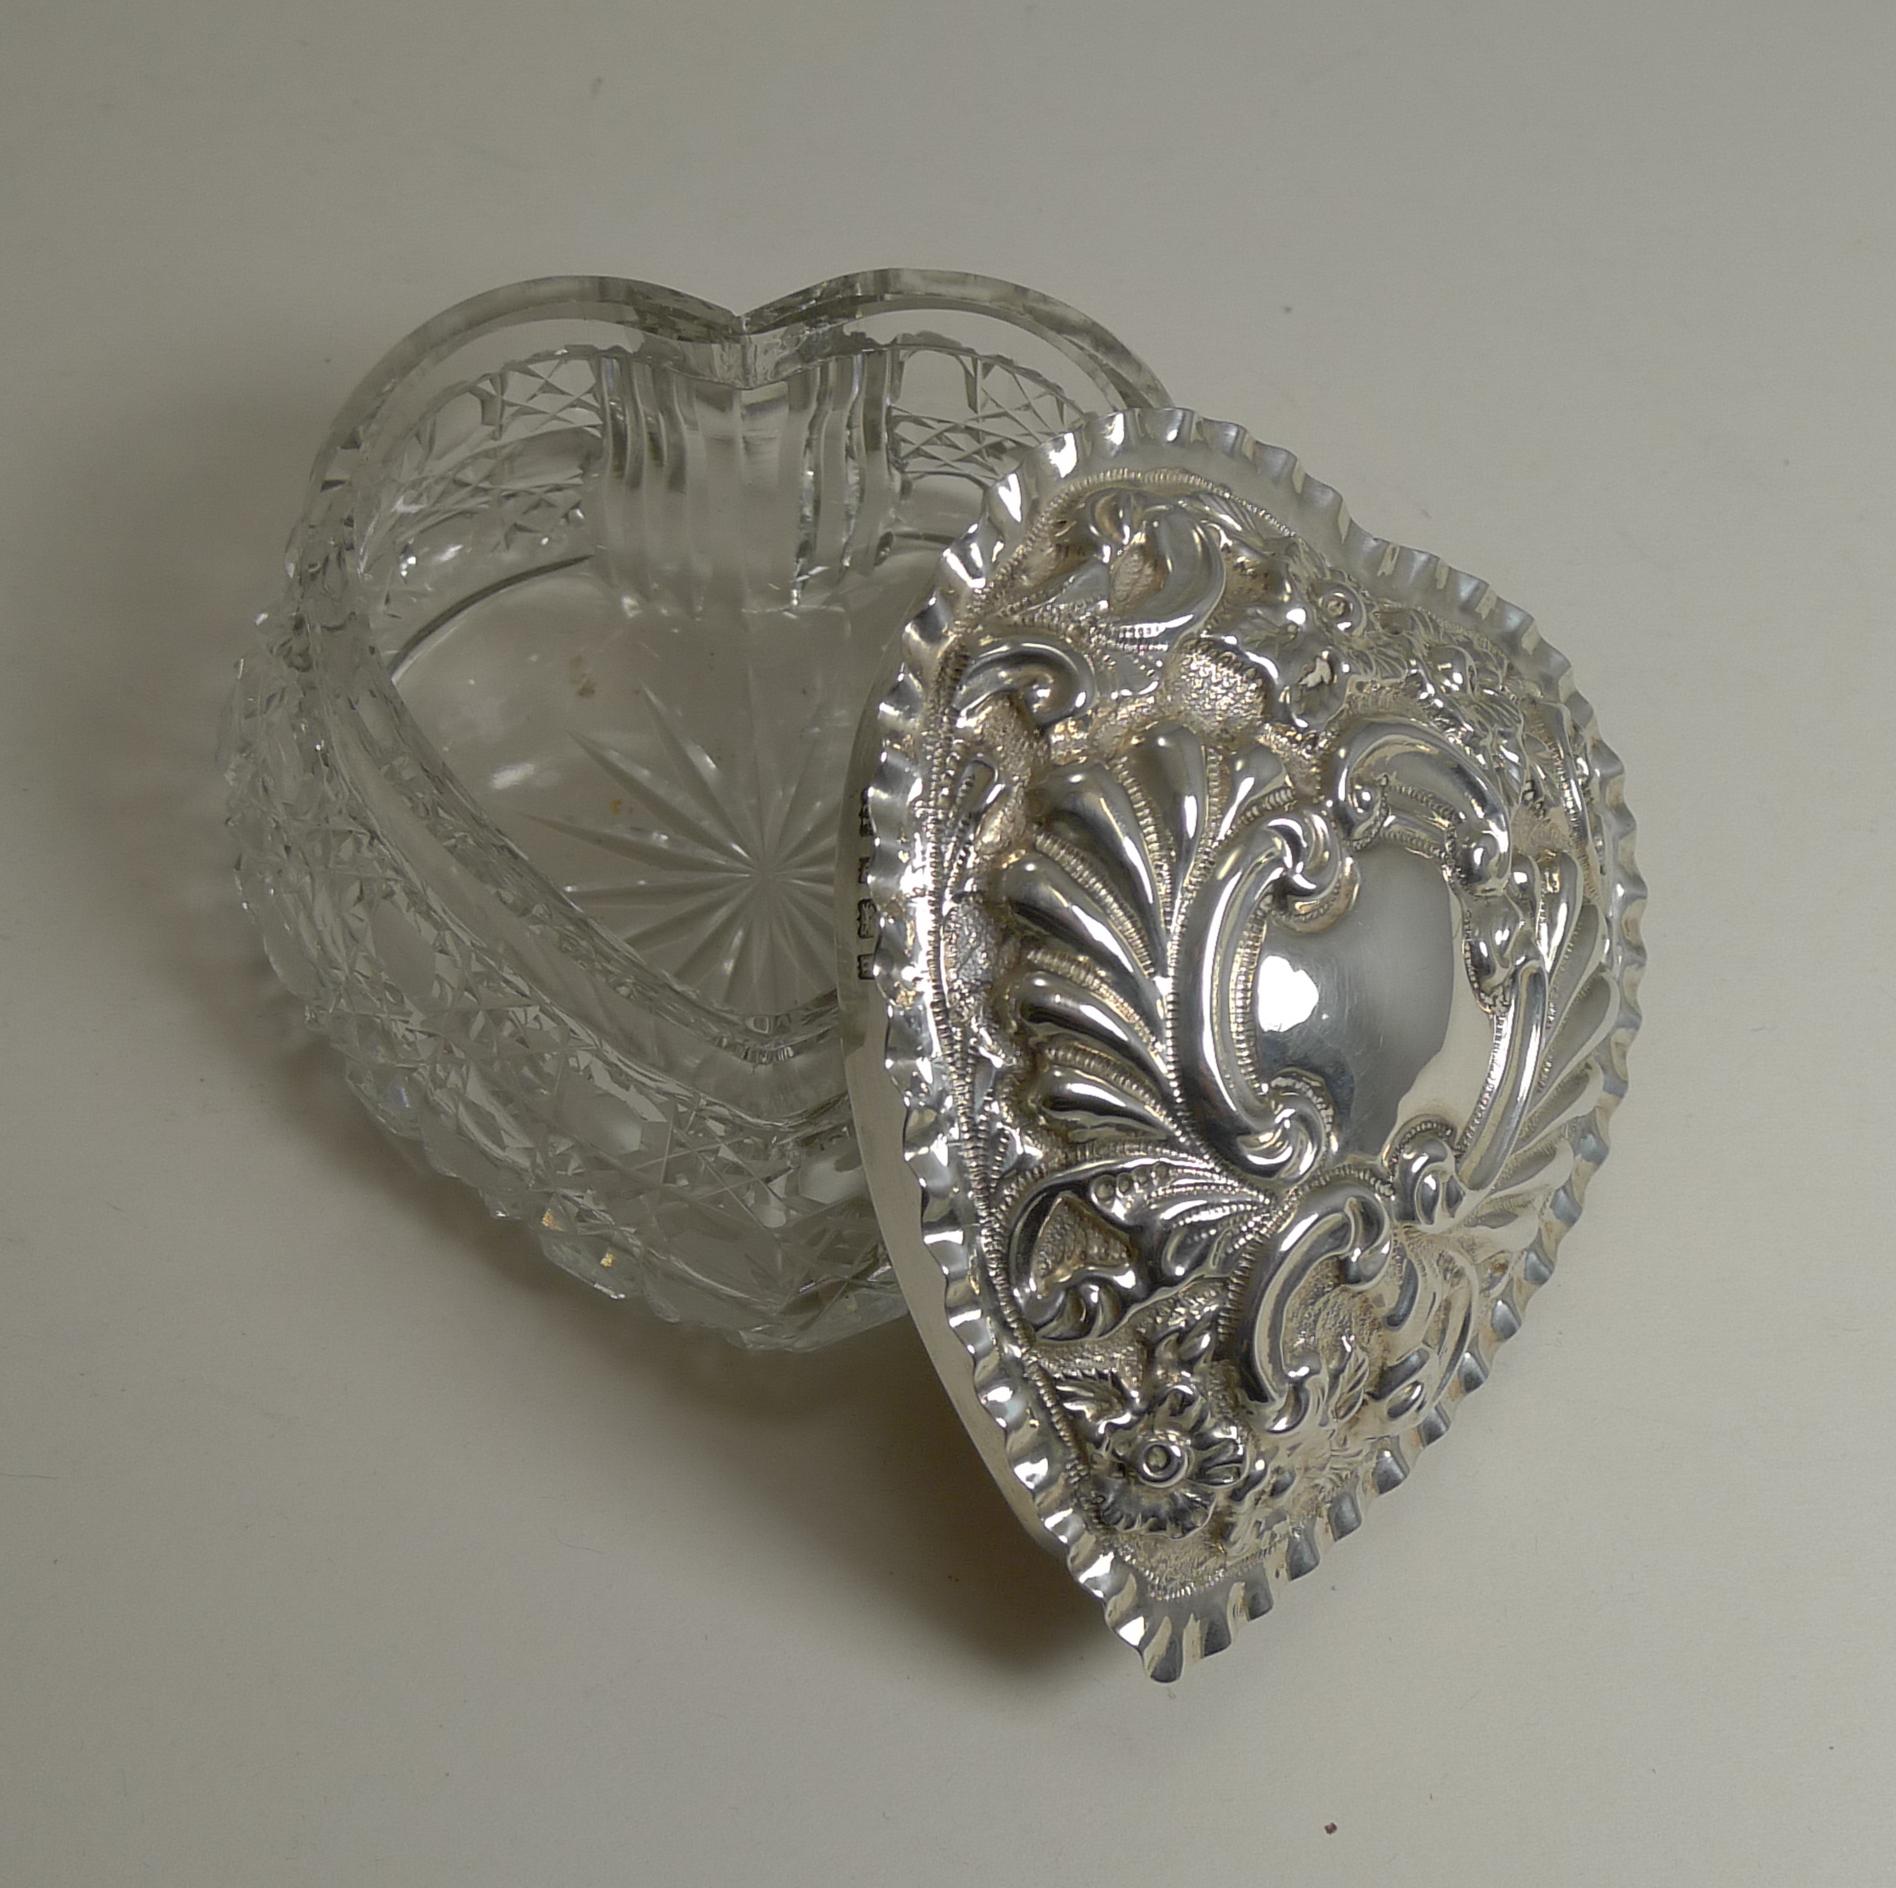 A romantic example of an Edwardian heart shaped trinket box made from a heavy thick piece of crystal beautifully cut in the ever-popular hobnail design with a star cut to the base.

The solid or sterling silver lid is excellent quality with a deep